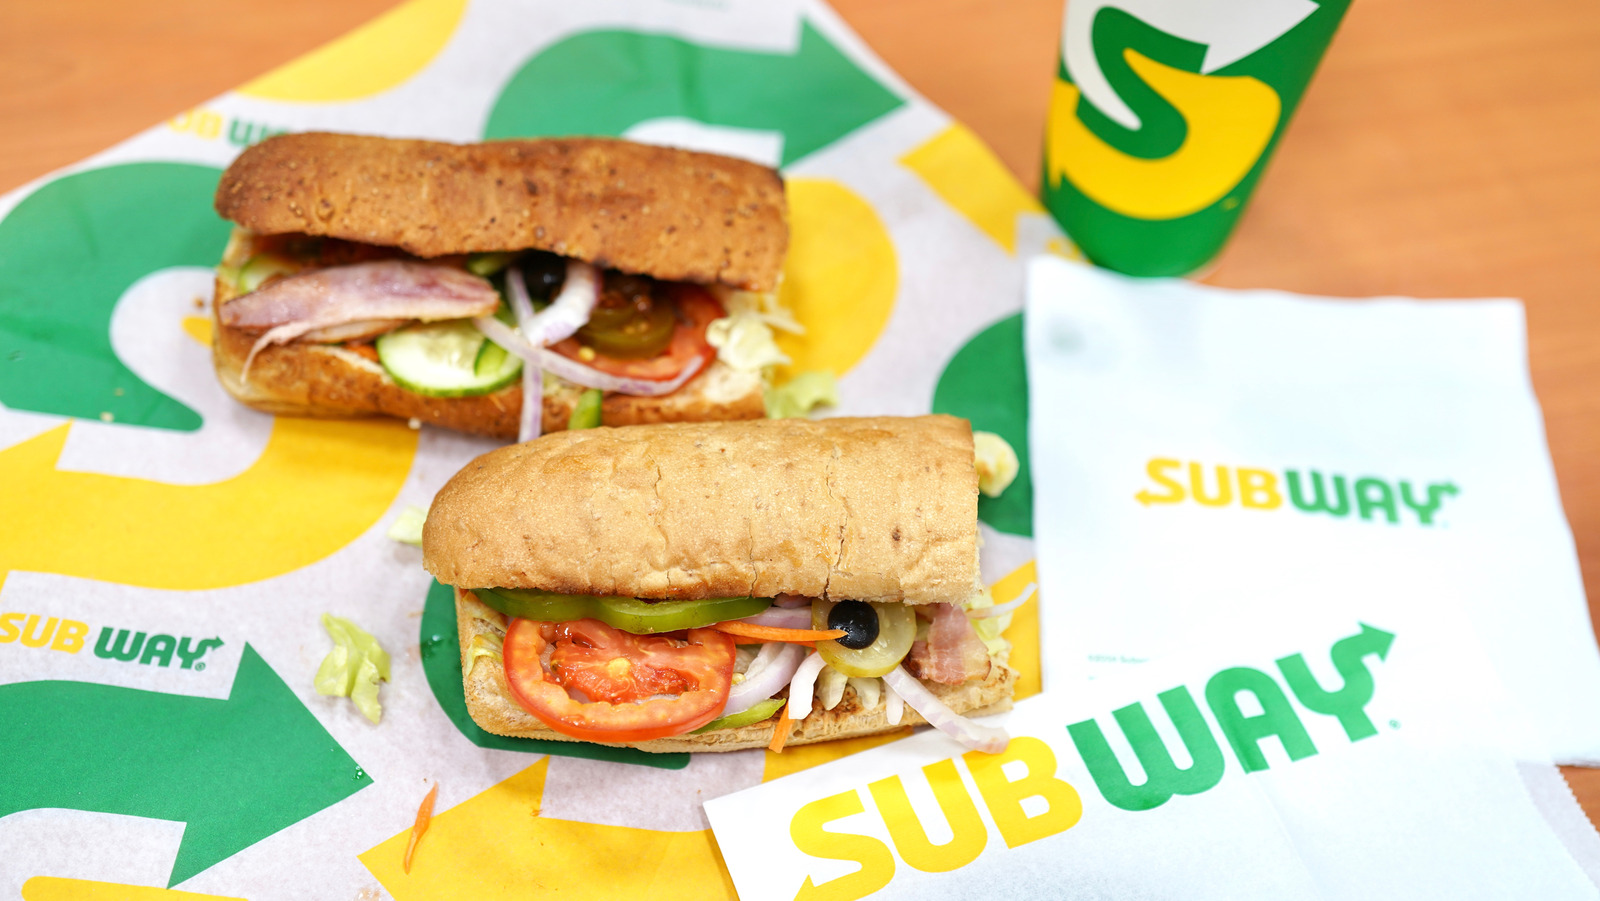 Subway Is Giving Away 10,000 Sandwiches To Airline Passengers For